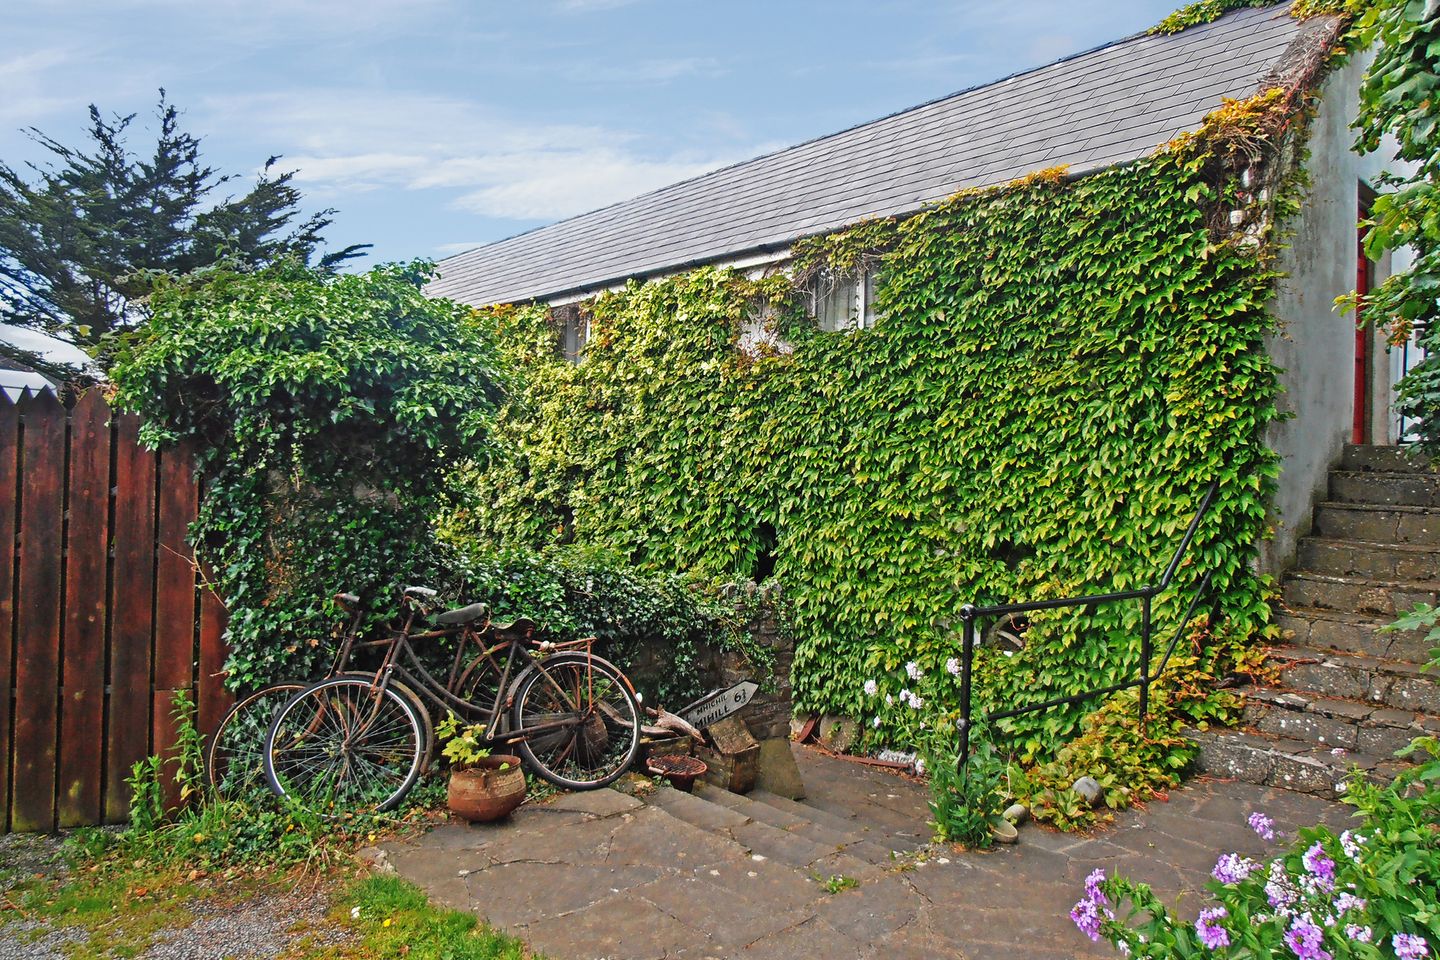 Cooraclare (I526), Cooraclare, Co. Clare